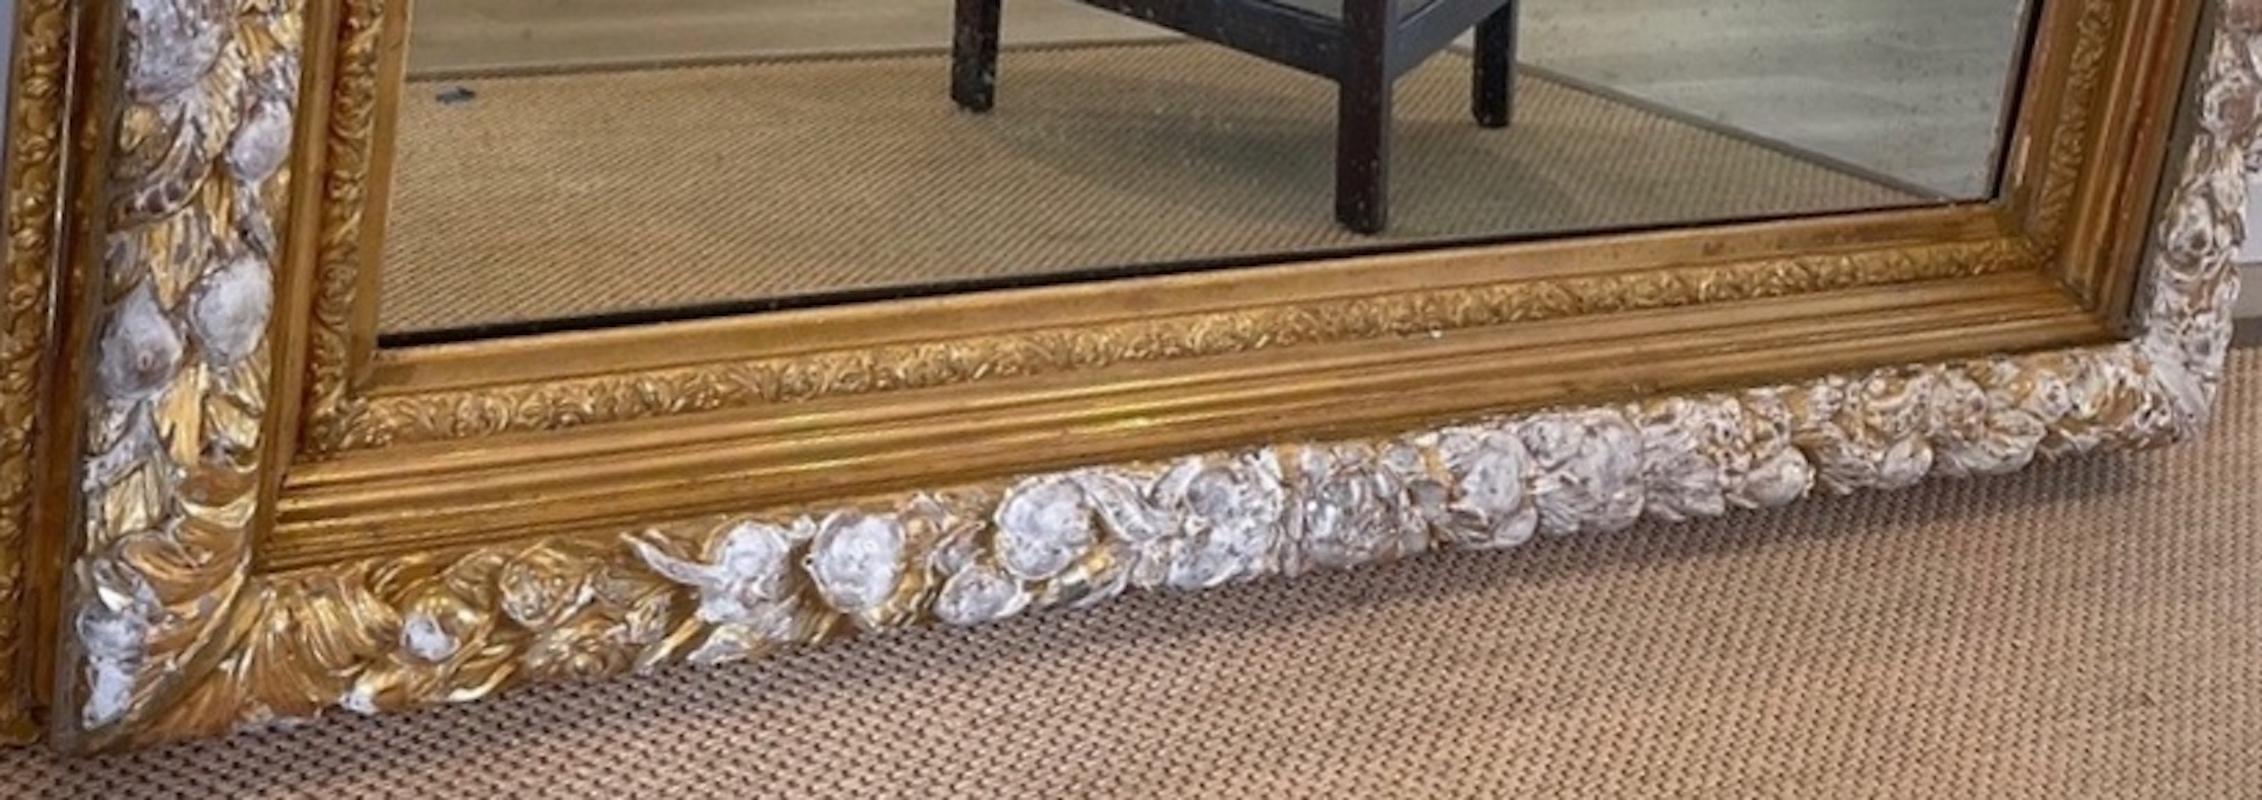 French 19th Century Hand-Carved Gold-Leaf Louis XVI Mirror For Sale 3